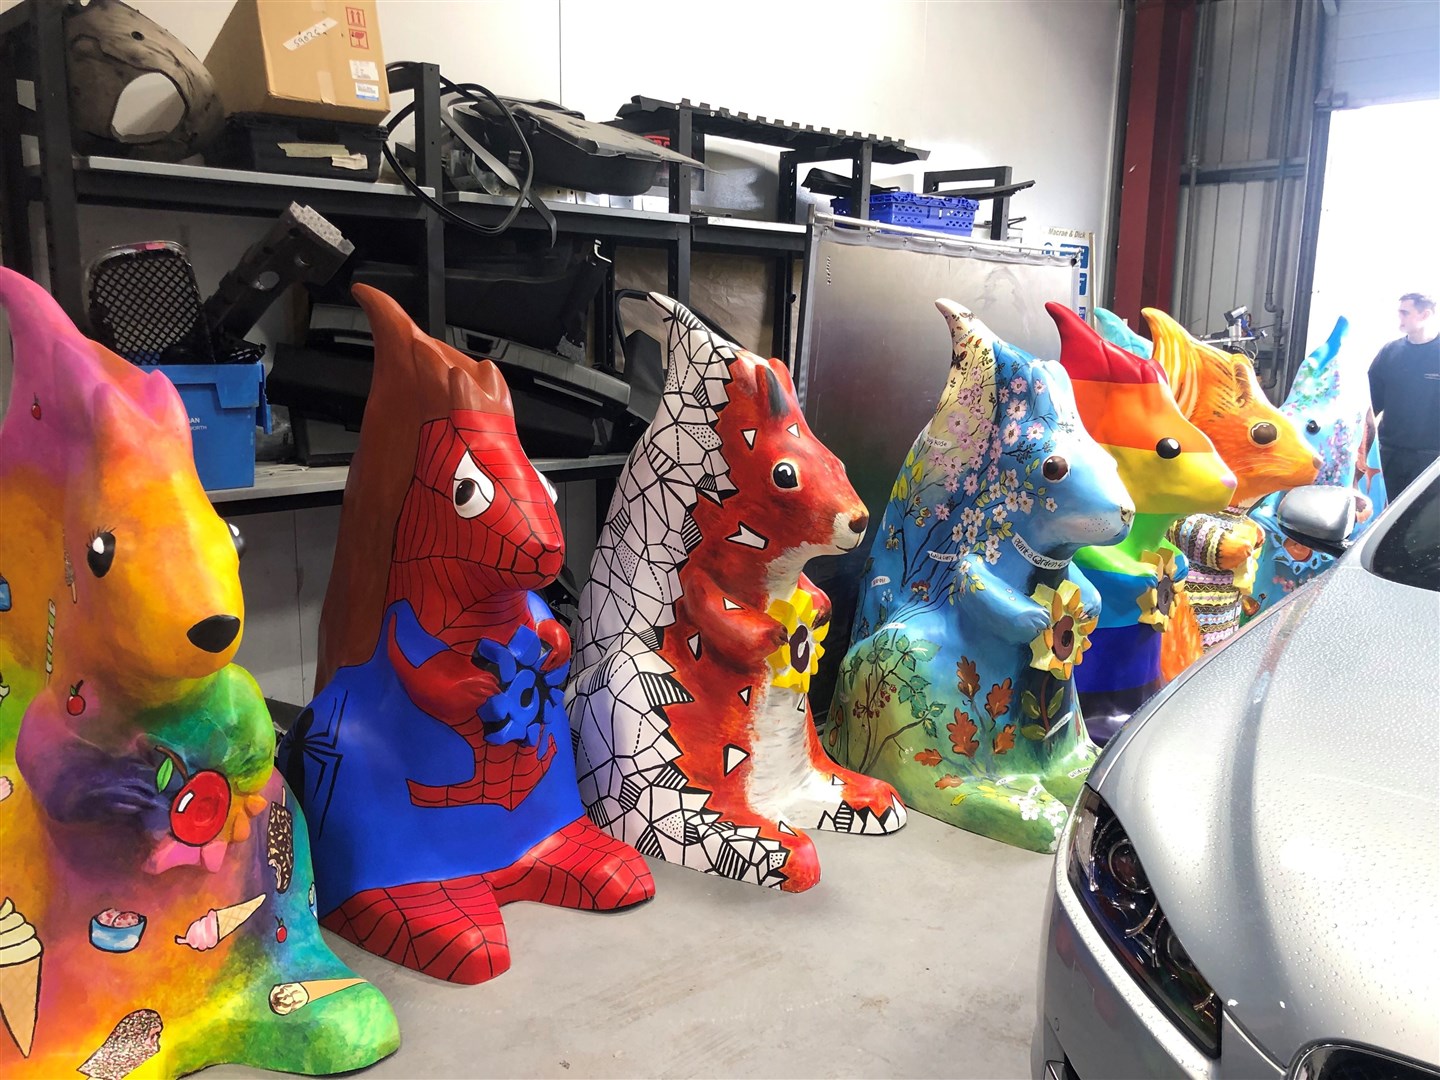 The squirrels have been individually designed and painted by a team of artists.